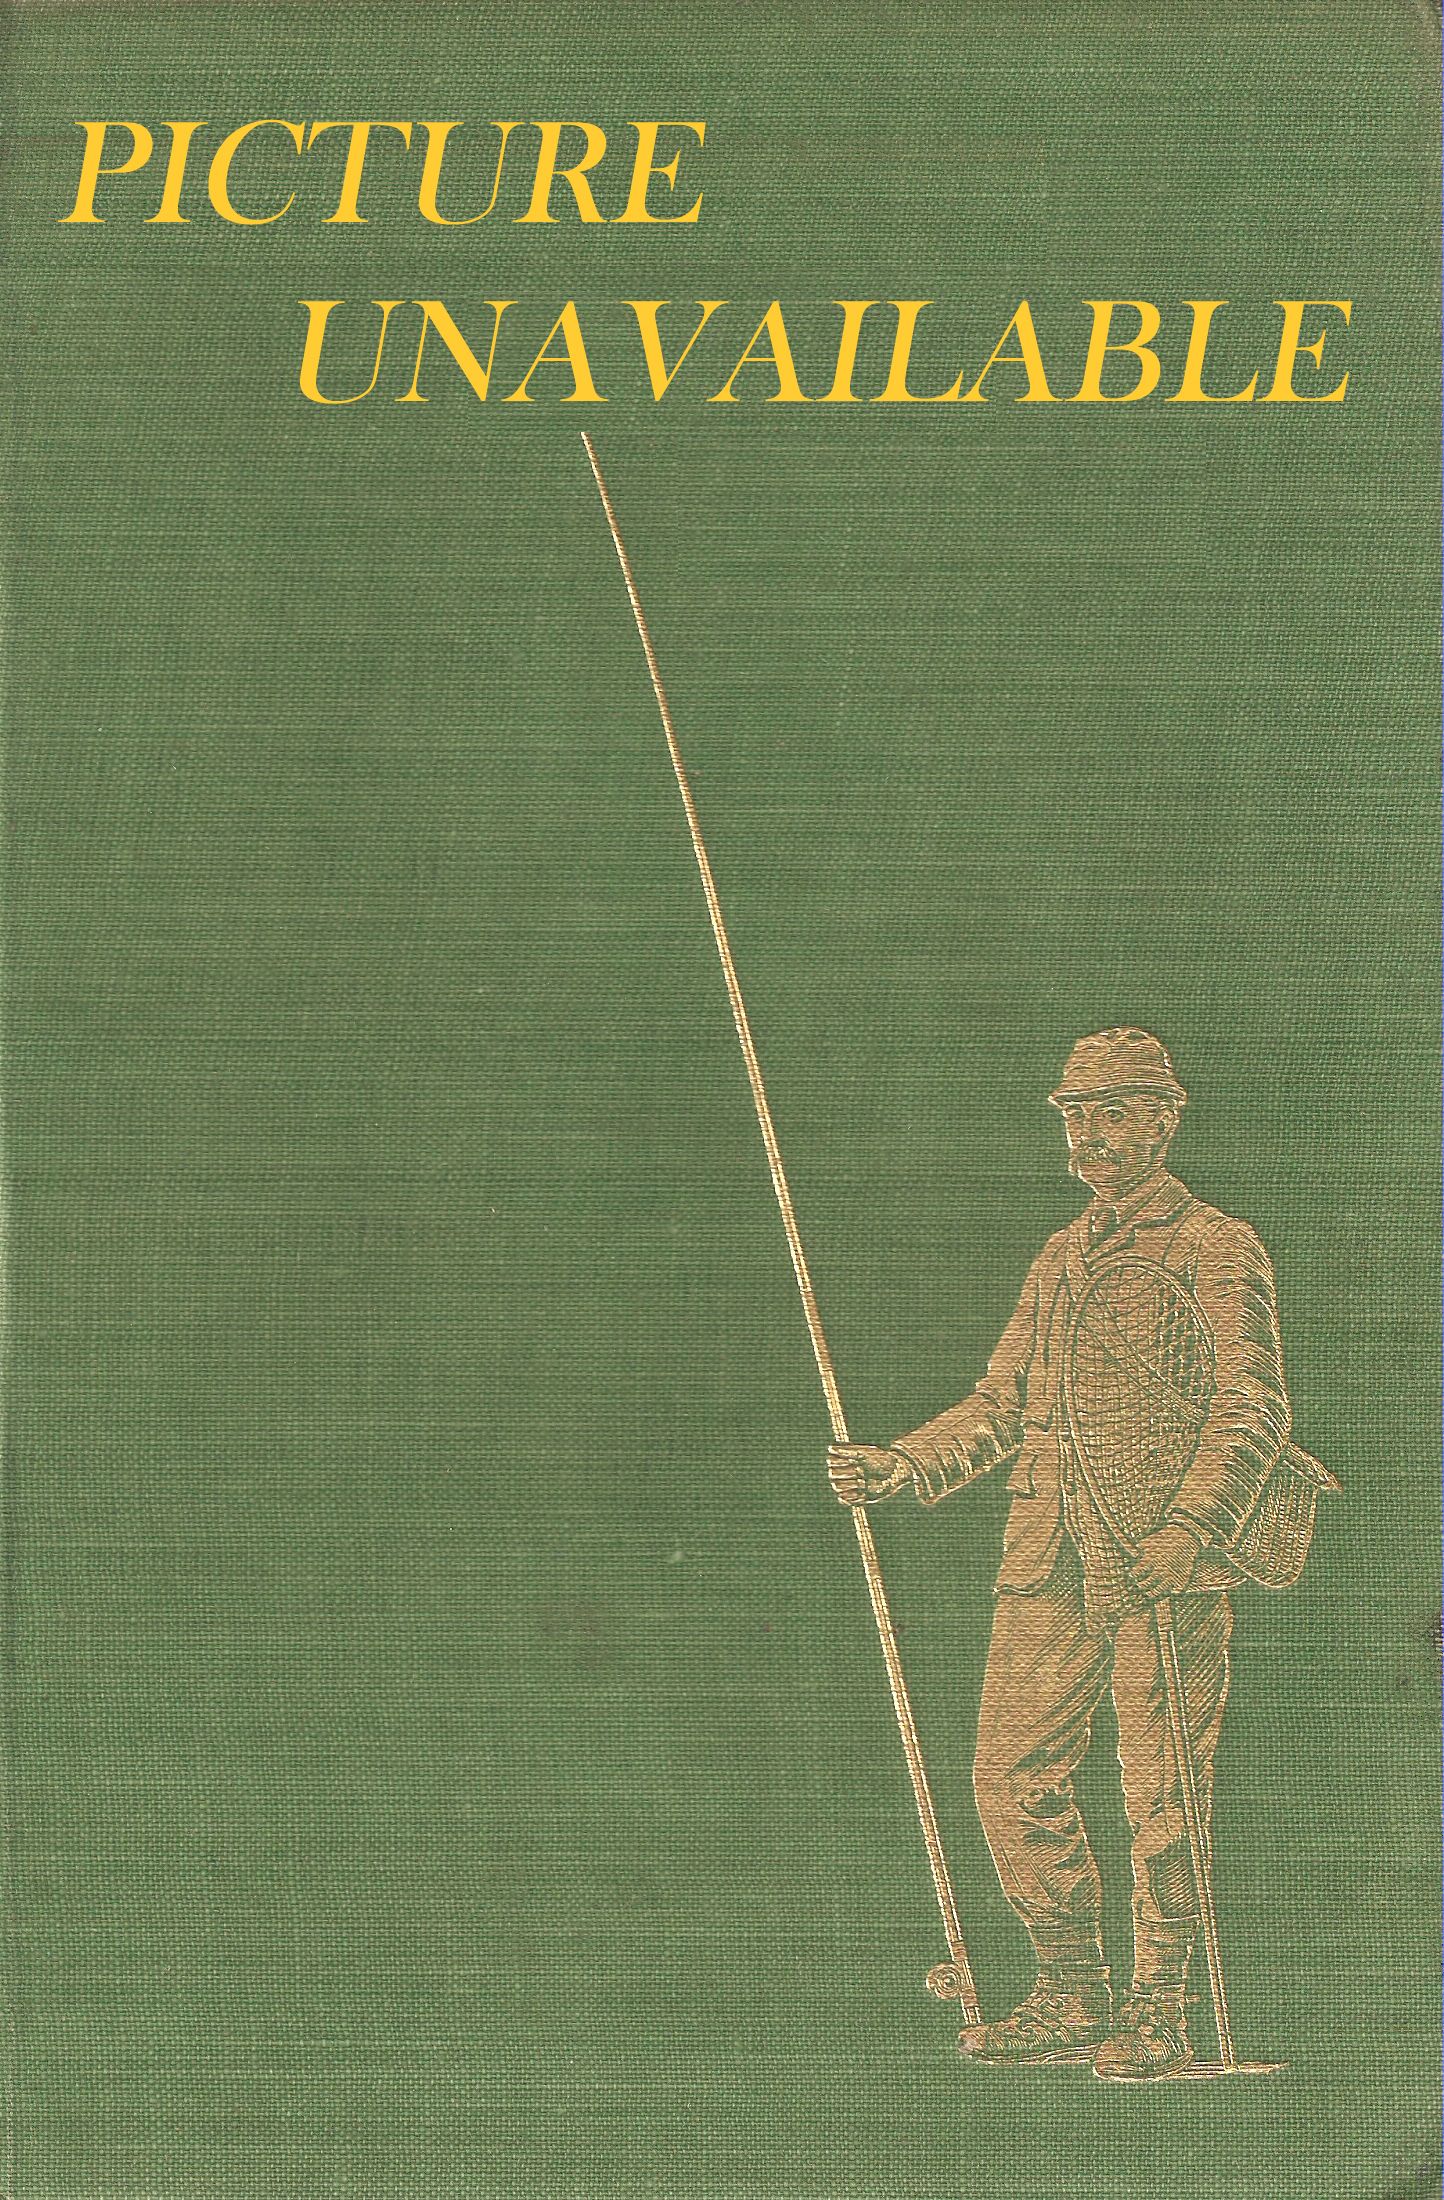 WILDFOWLING AND ROUGH SHOOTING. By Noel M. Sedgwick (